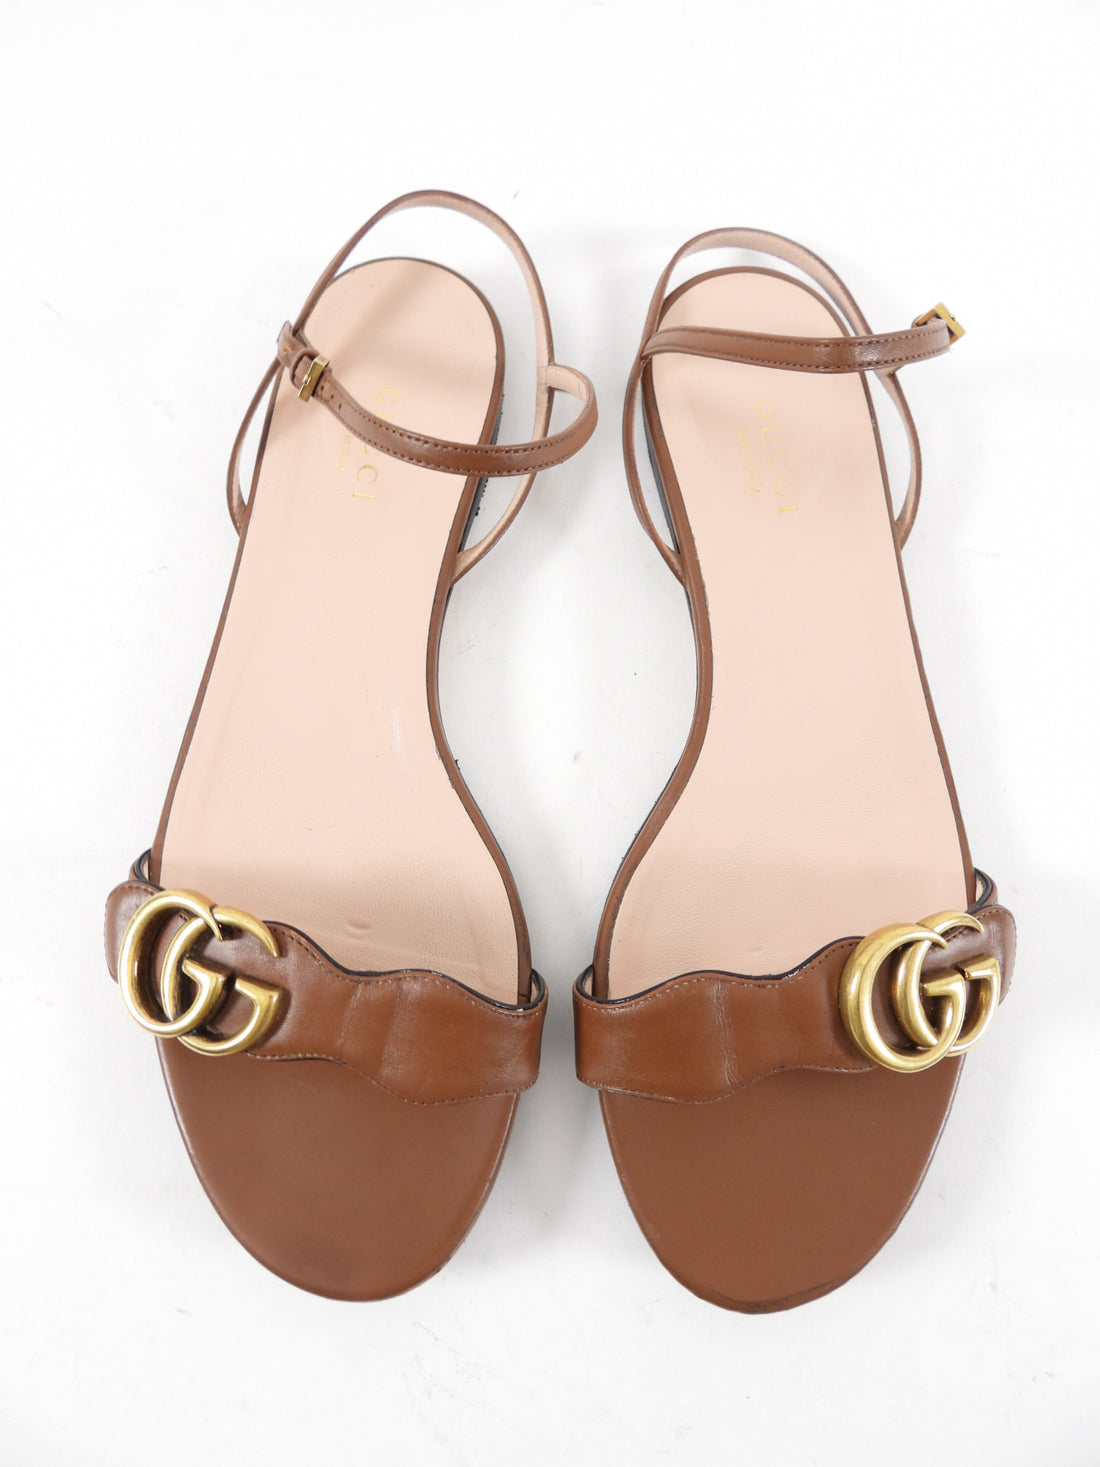 Gucci GG Marmont Brown Leather Flat Sandals - 38.5